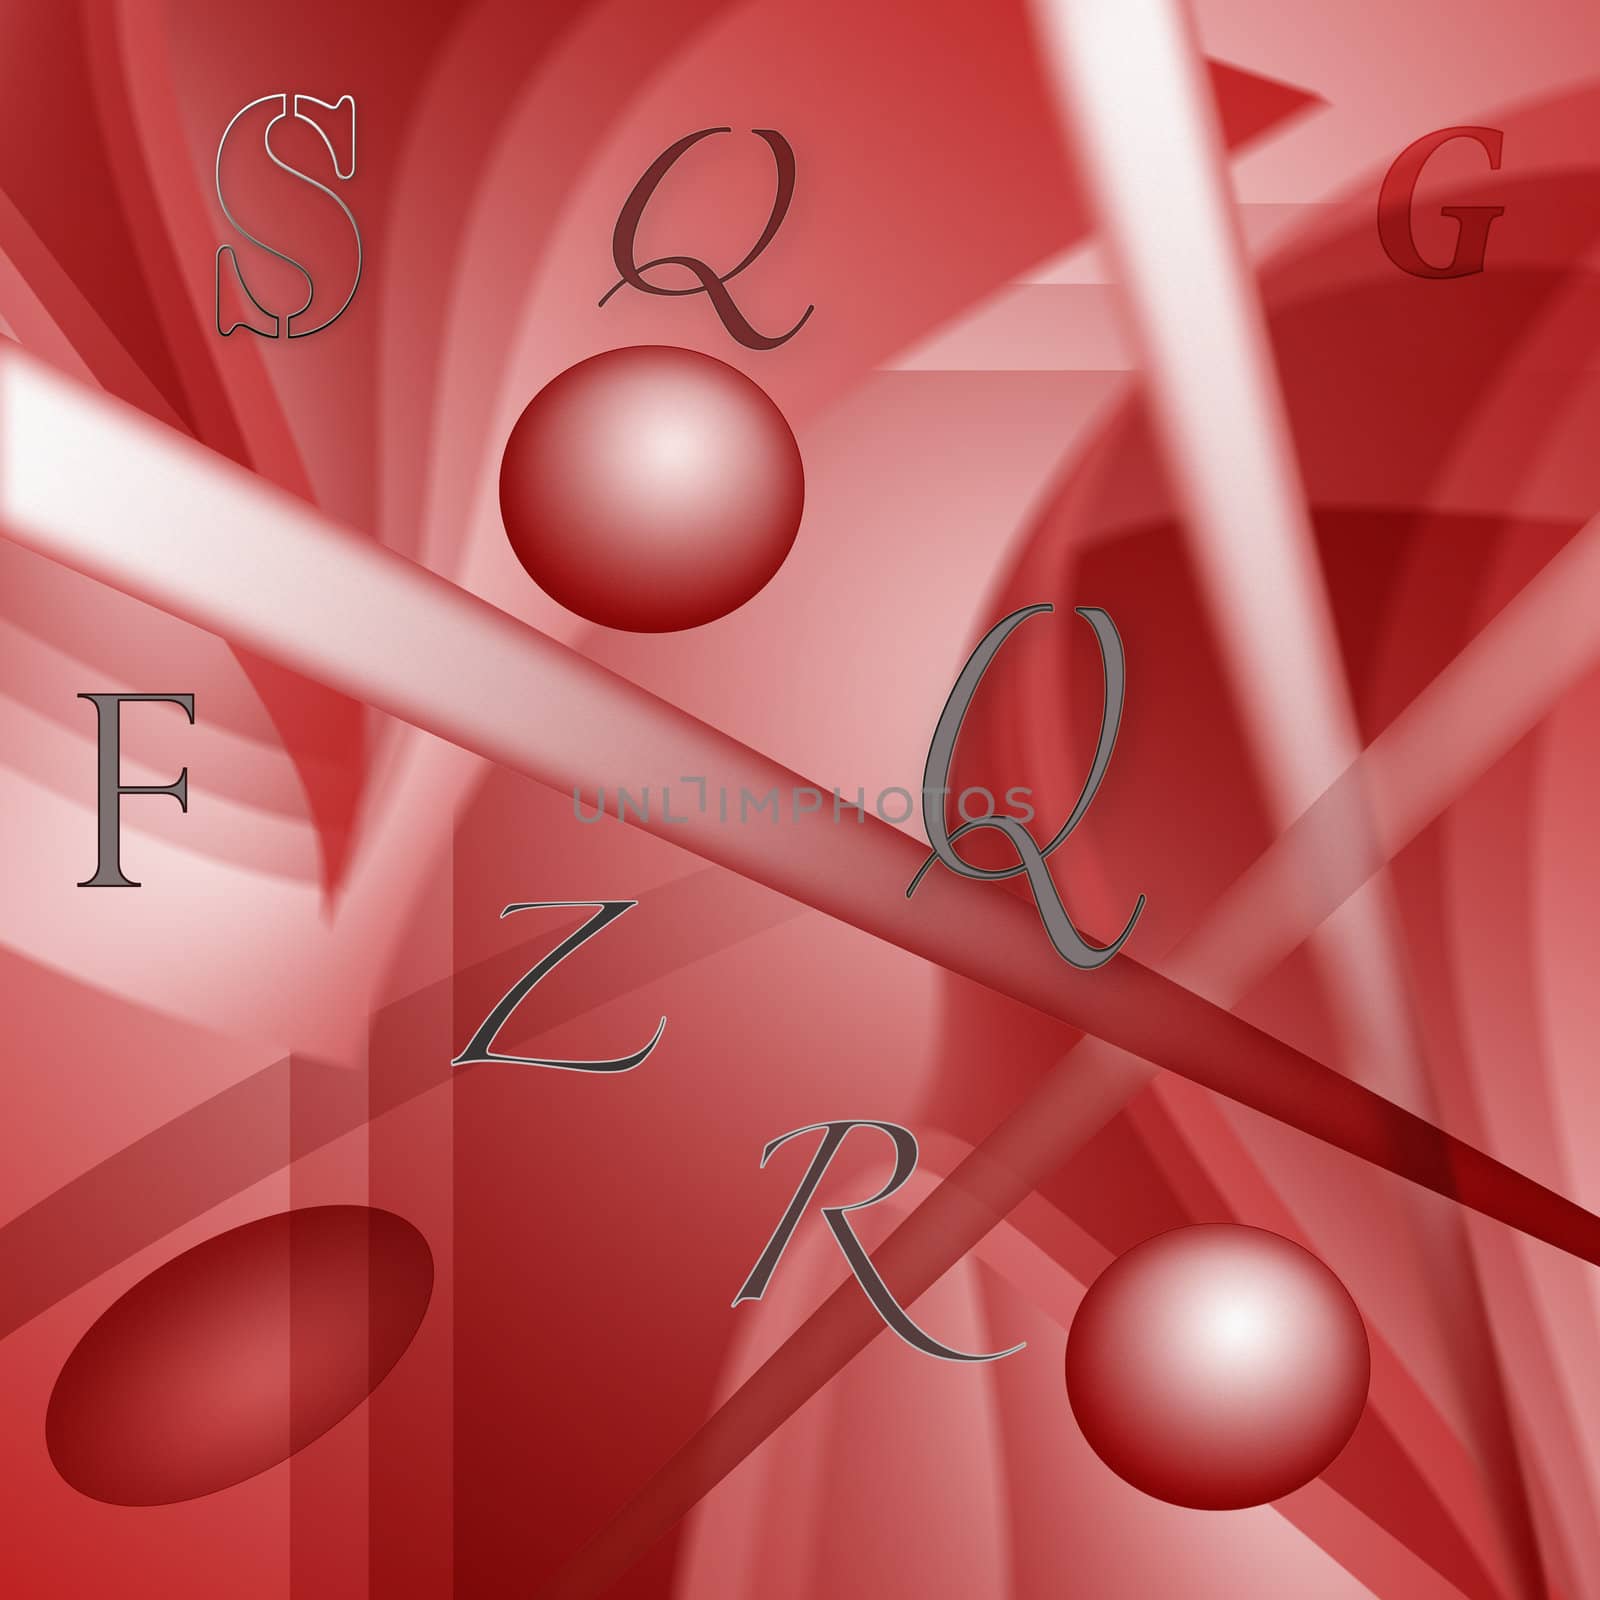 Random letters  on red abstract background.